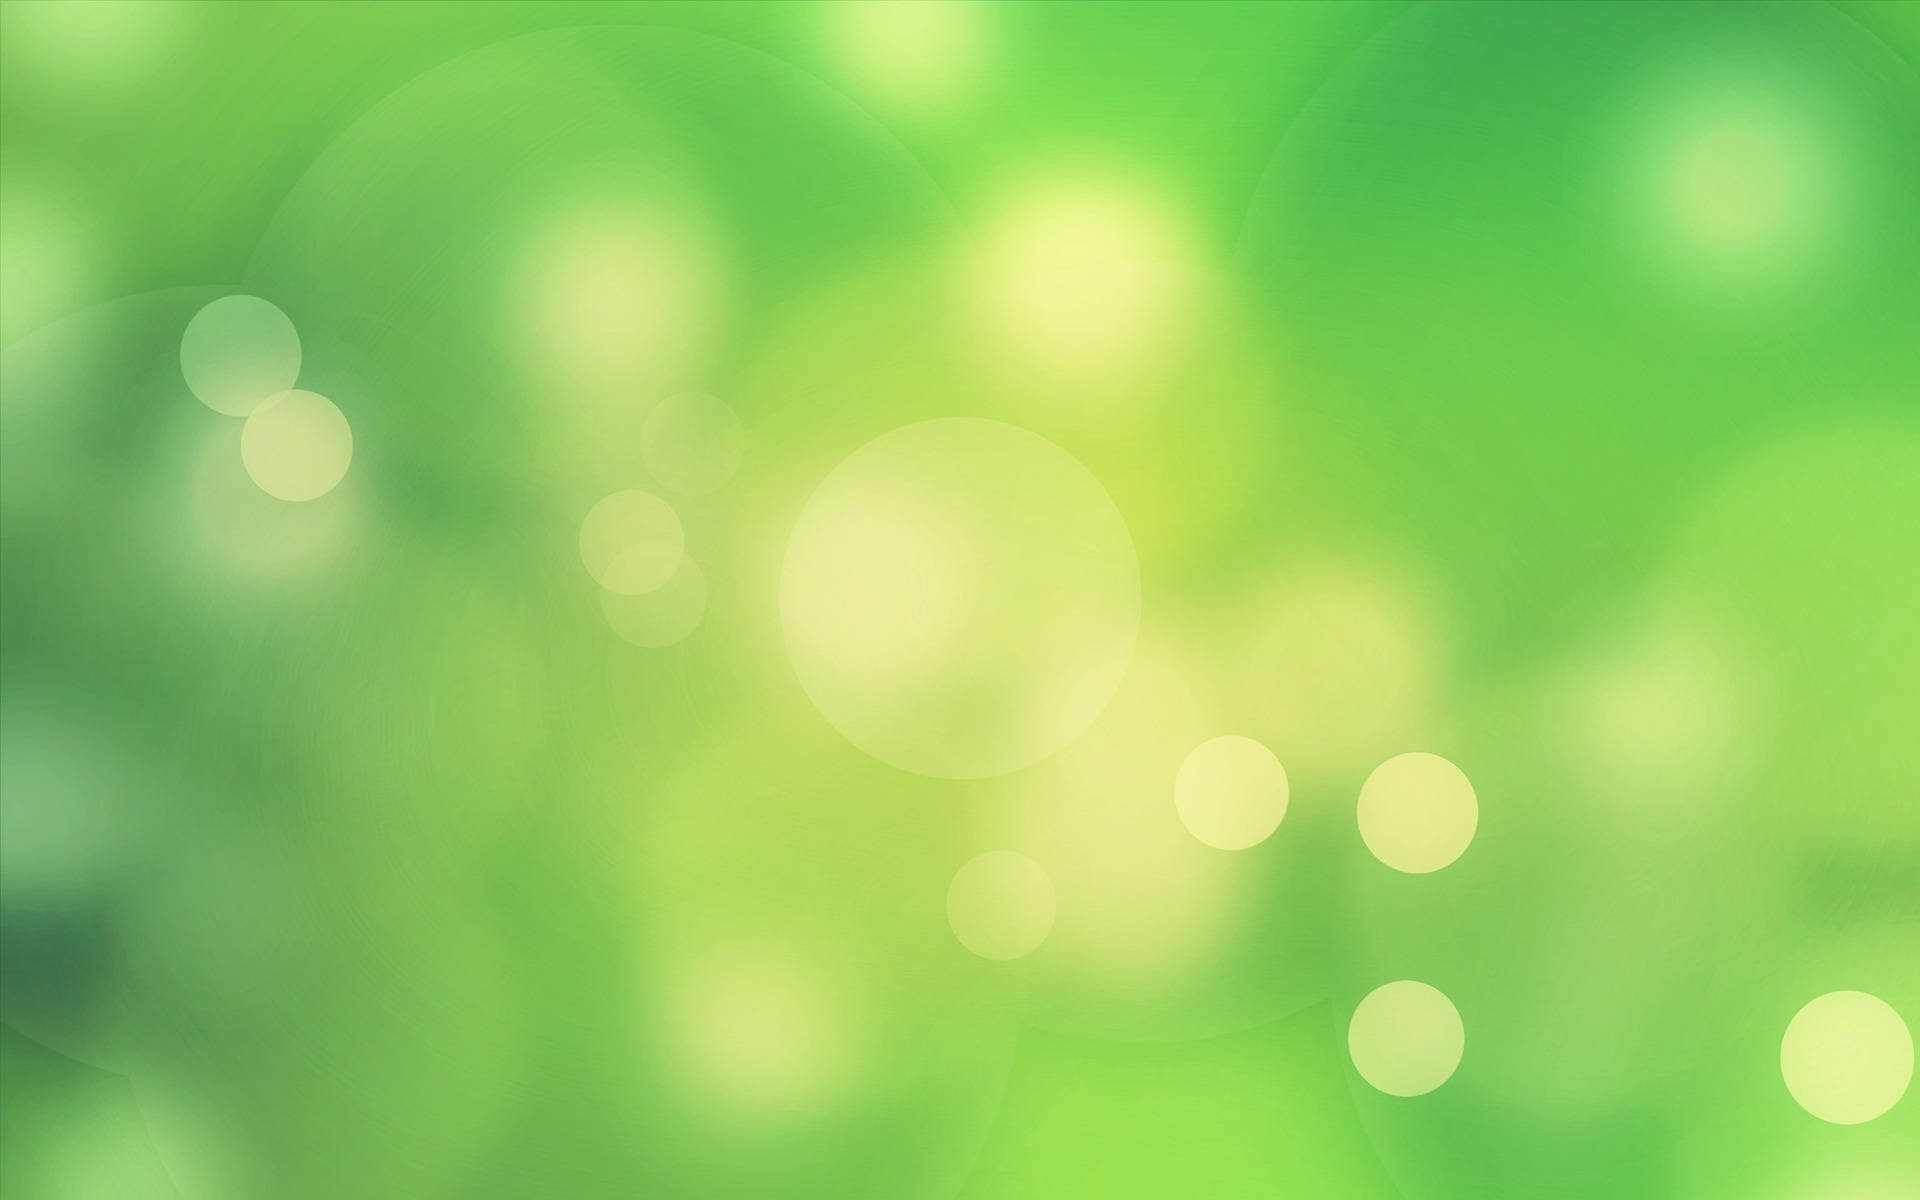 Caption: Energizing Green Abstract Design Wallpaper